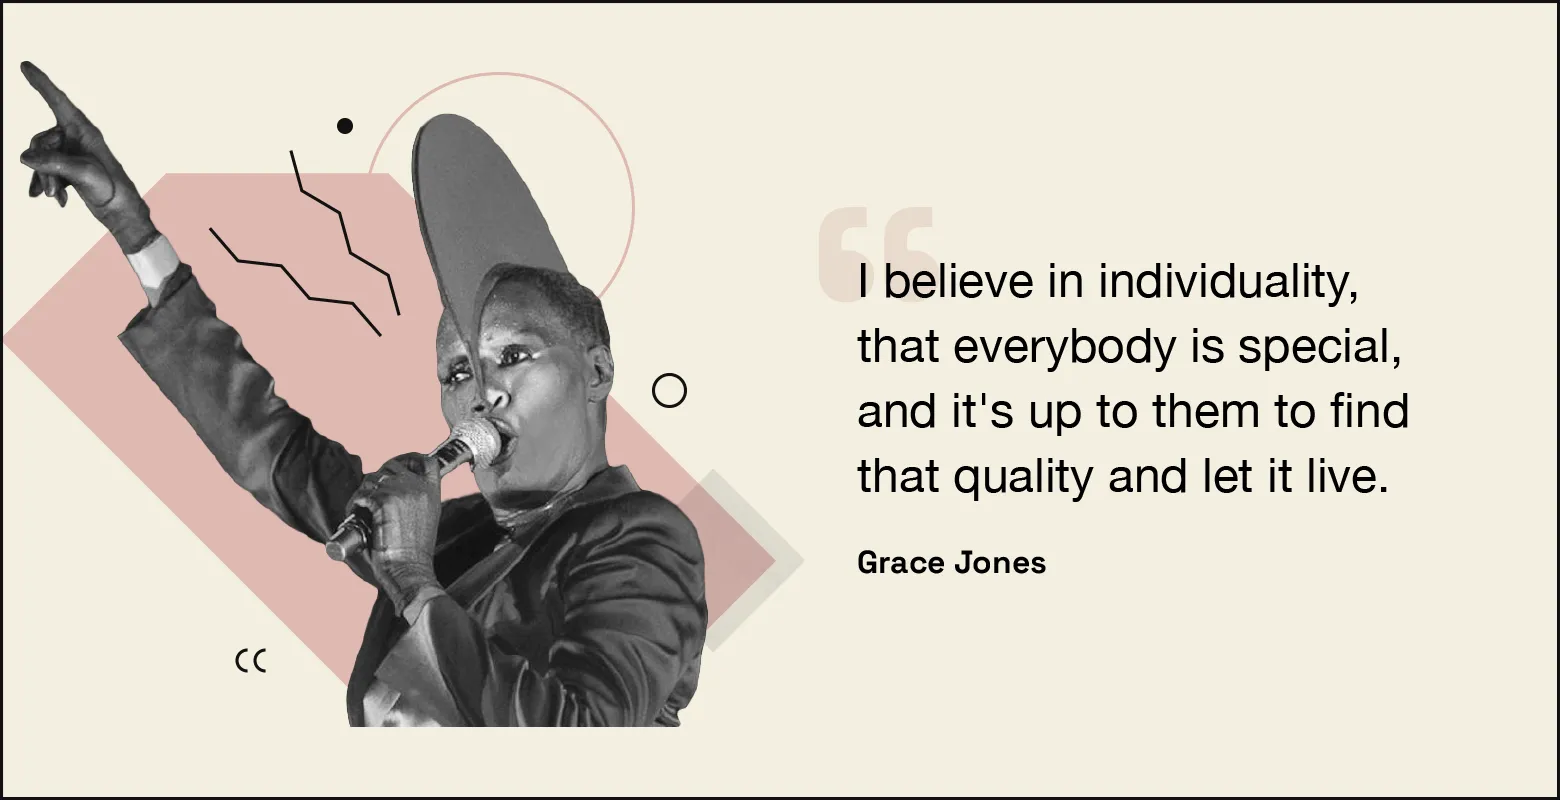 “I believe in individuality, that everybody is special, and it’s up to them to find that quality and let it live.” — Grace Jones.